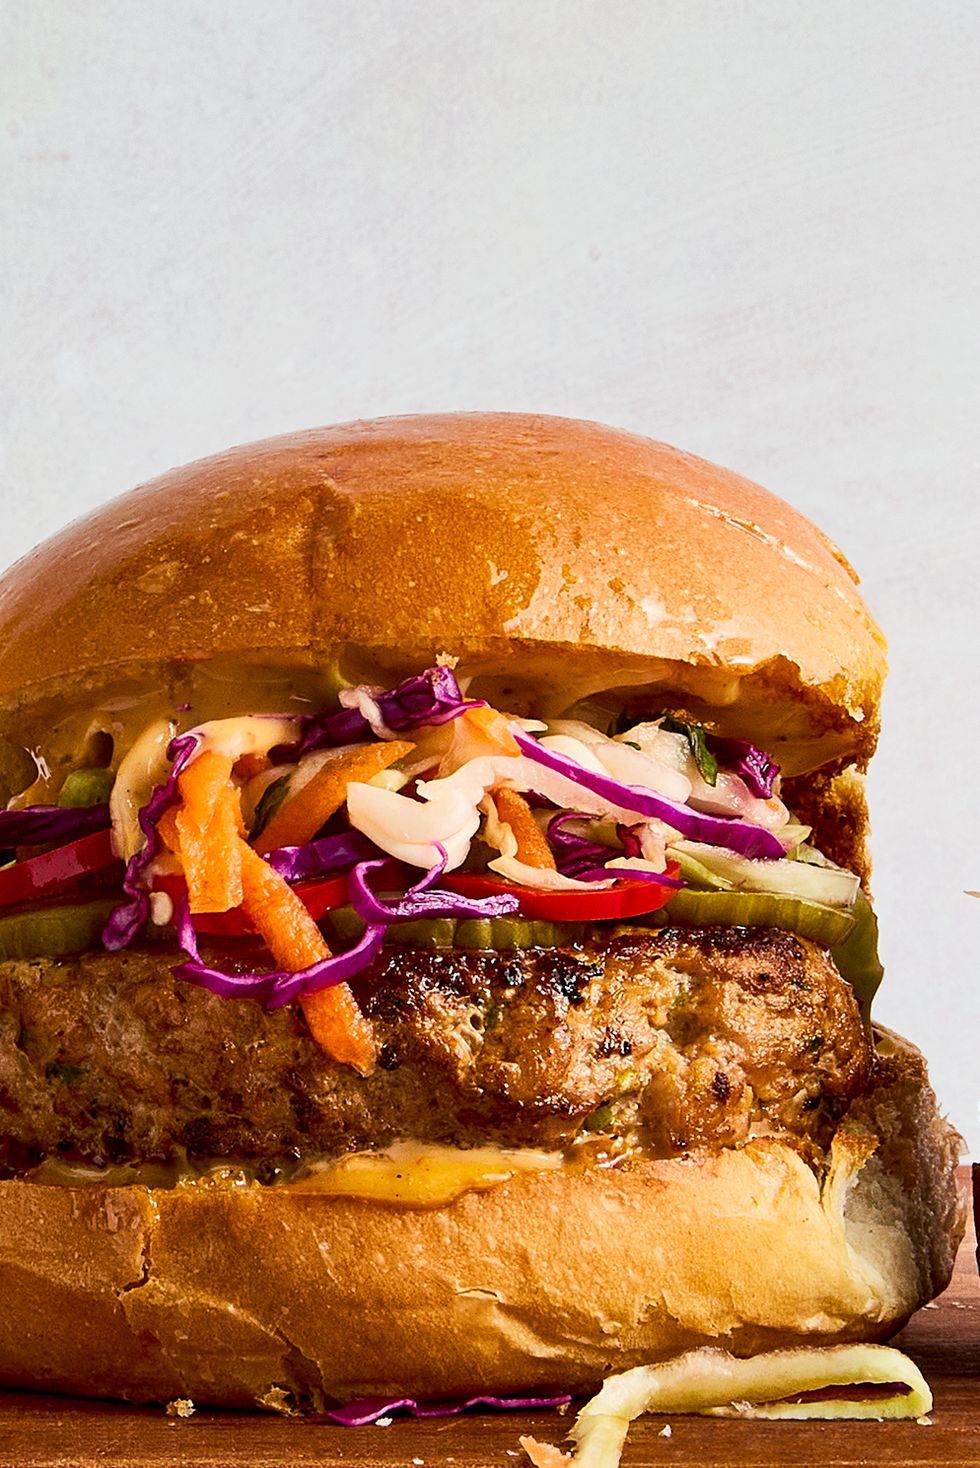 a ginger, garlic, and scallion studded turkey patty, pickled spicy peppers and cucumbers, a bright, crisp cabbage slaw, and plenty of sweet chili mayo all on a shiny, fluffy brioche bun